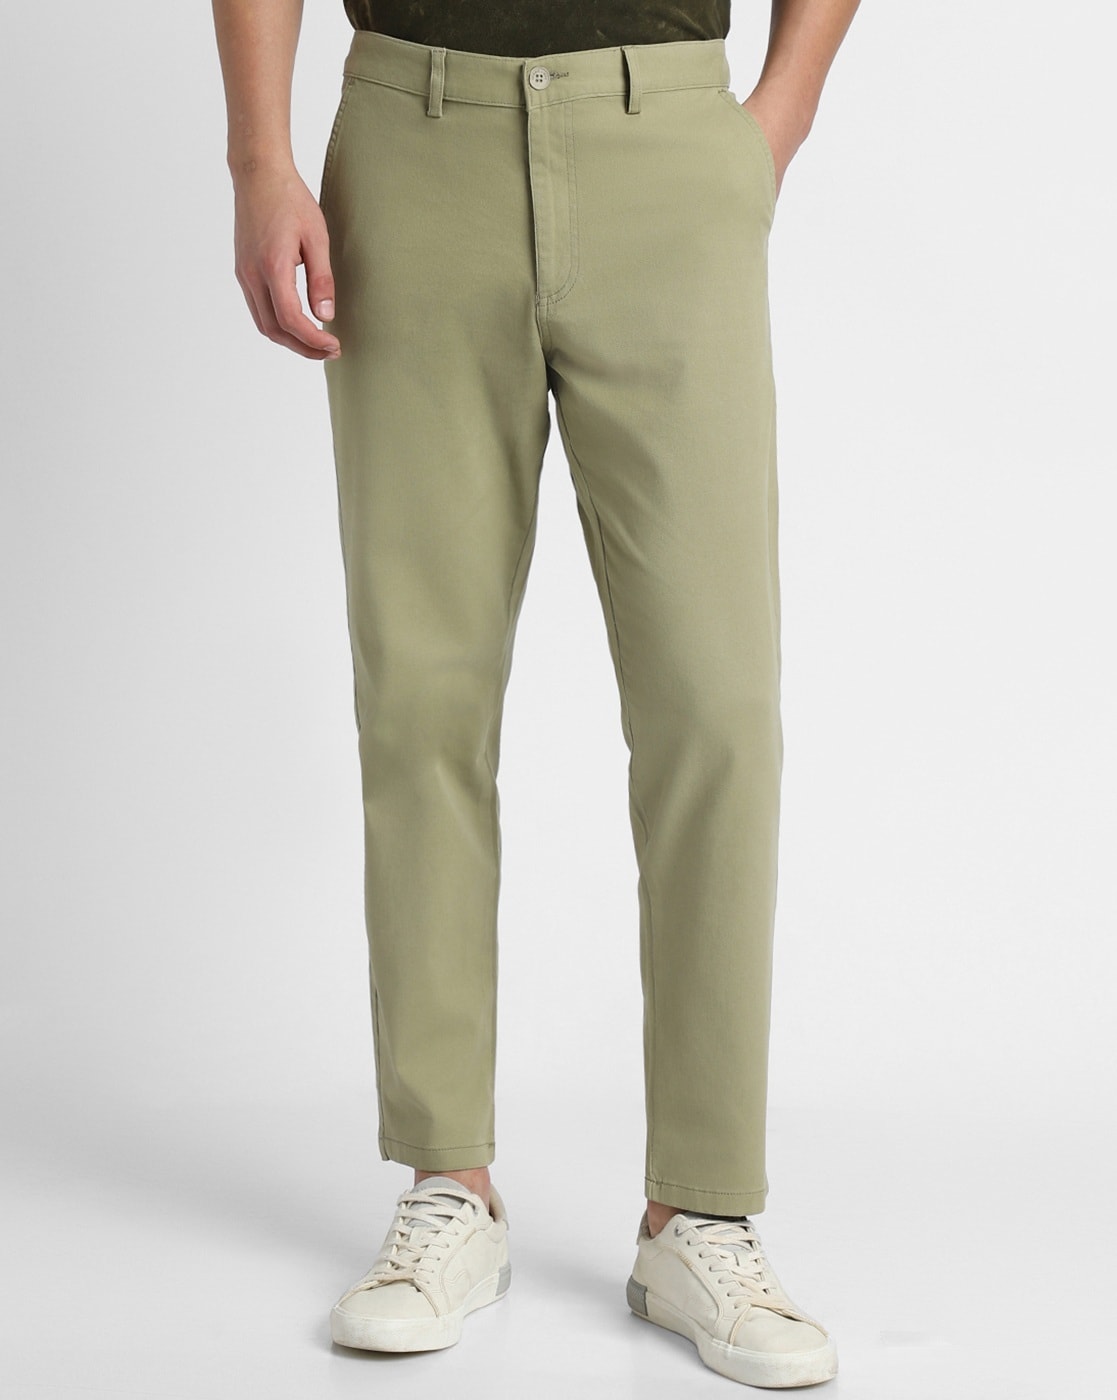 Stylus 5 Pocket Mens Straight Fit Flat Front Pant - JCPenney